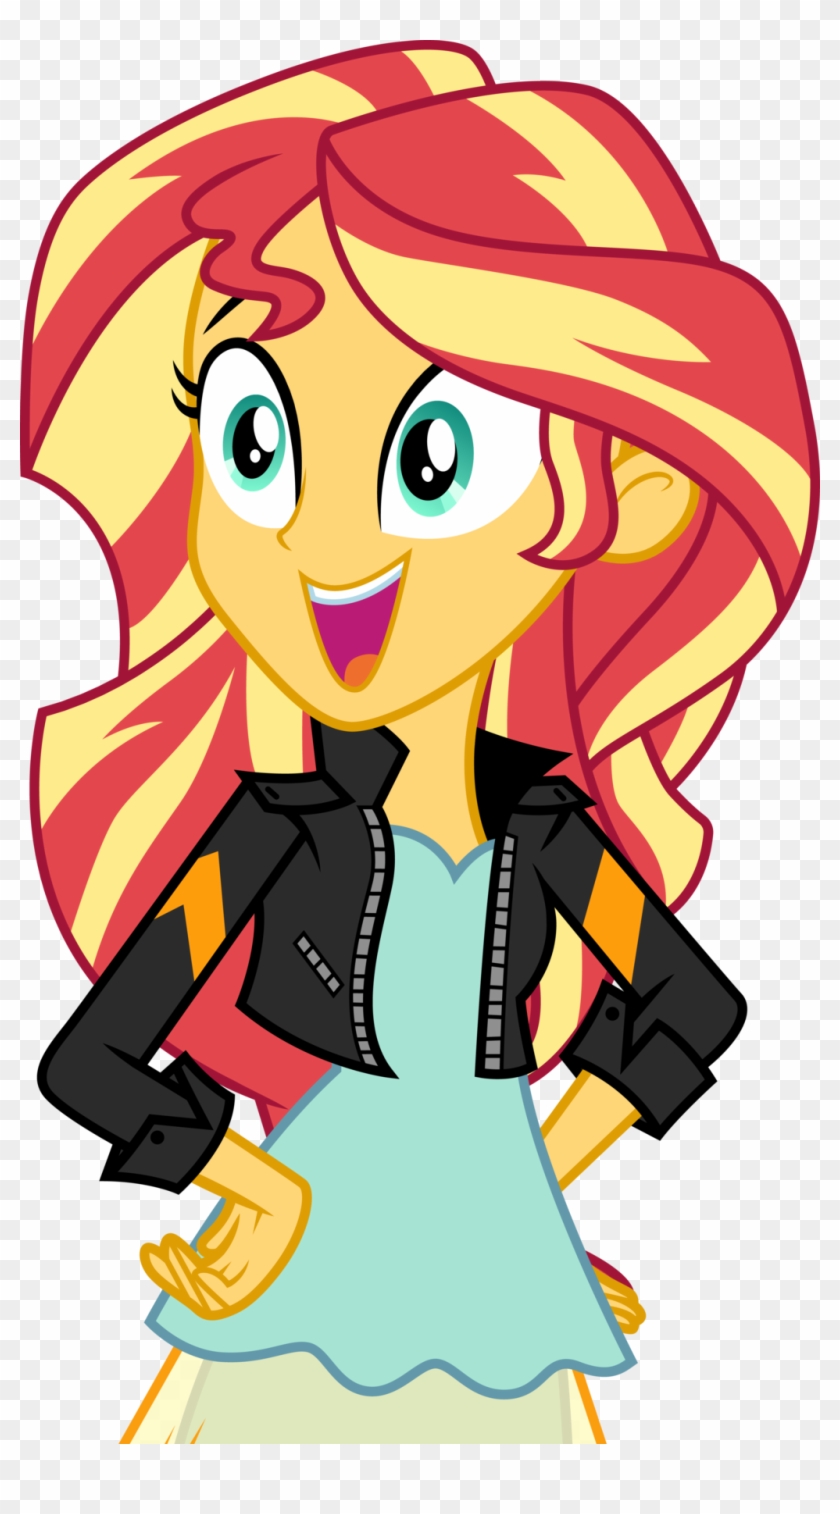 Cloudyglow 67 3 Excited Sunset Shimmer By Cloudyglow - Sunset Shimmer Dance Magic #591787